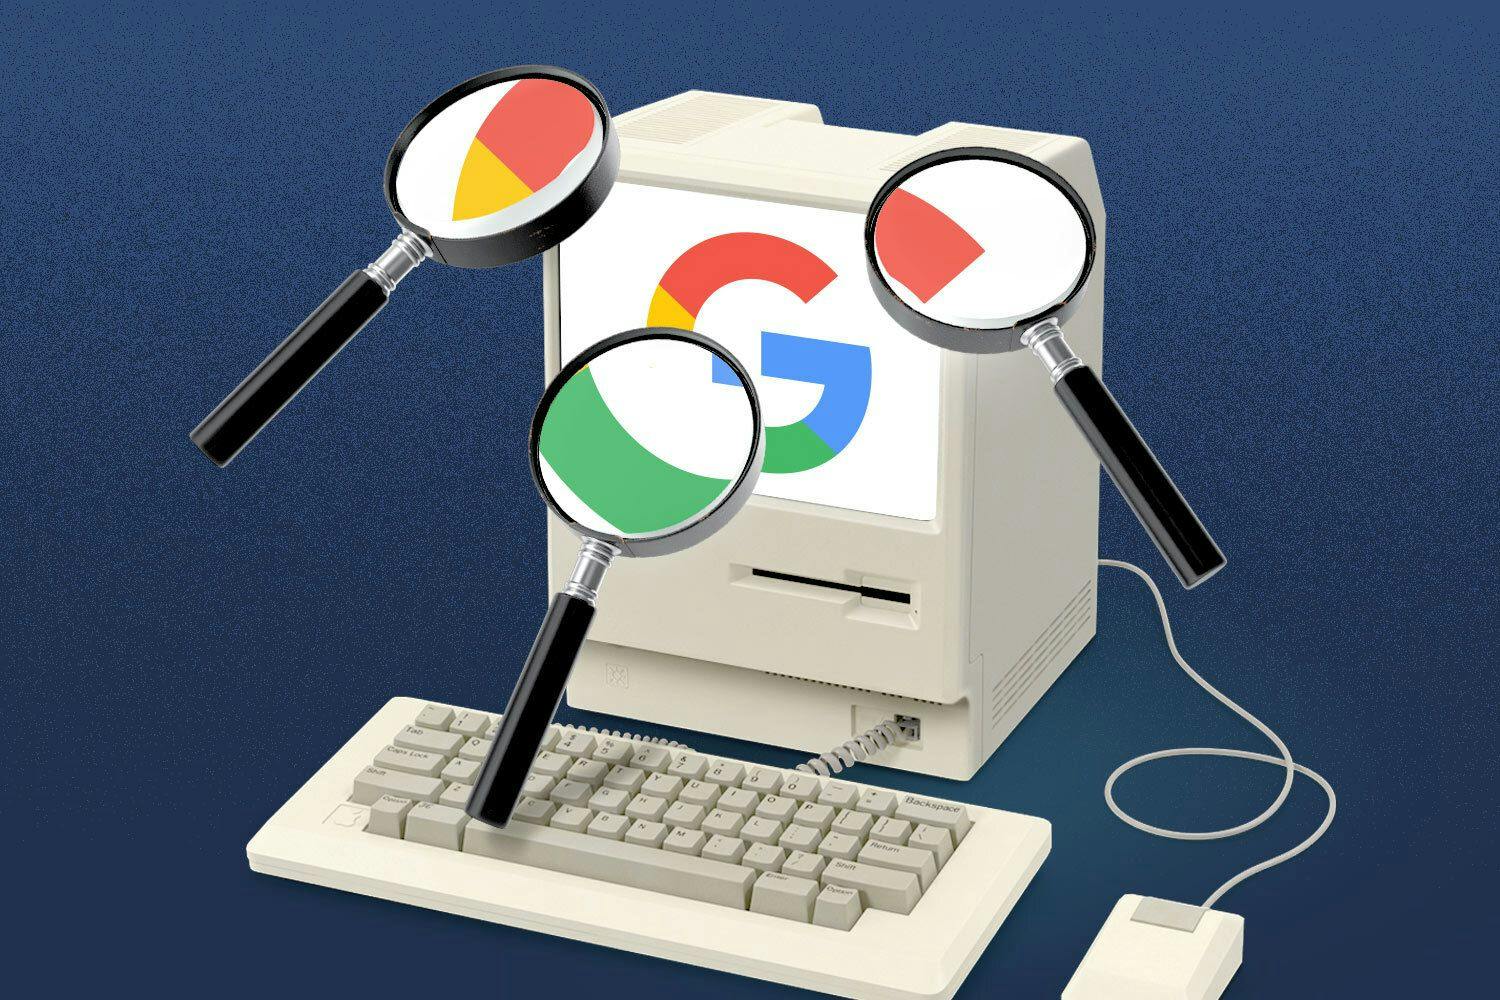 Magnifying glasses examining a computer with the Google logo